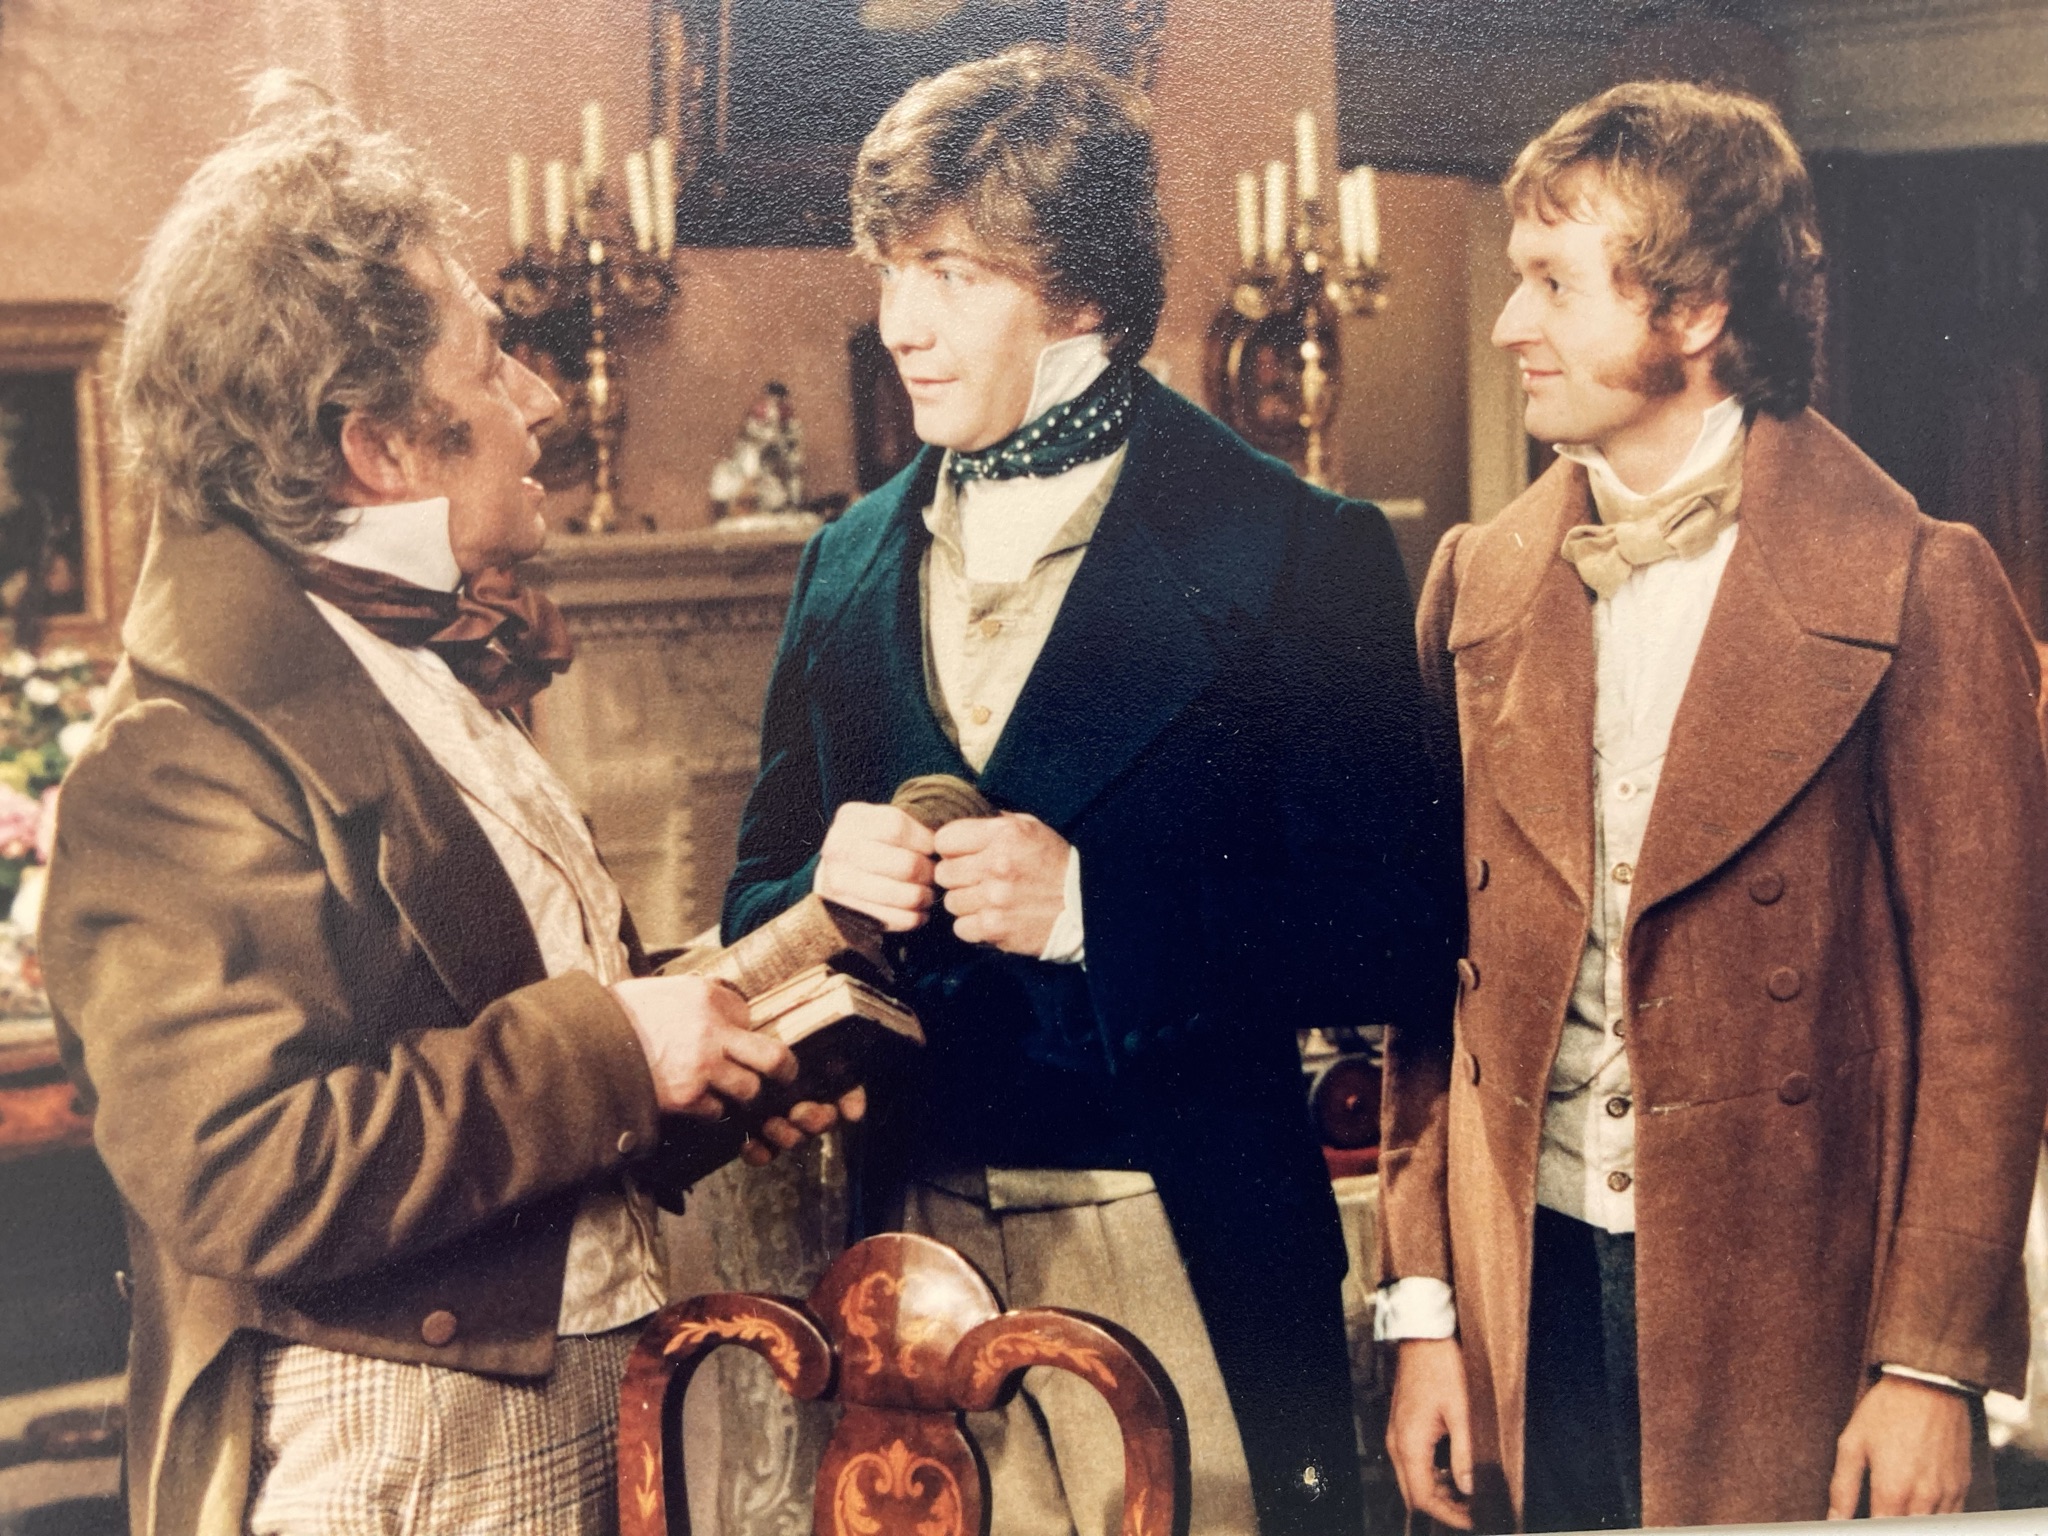 Timothy Bateson, Tim Munro, and Gerry Sundquist in Great Expectations (1981)